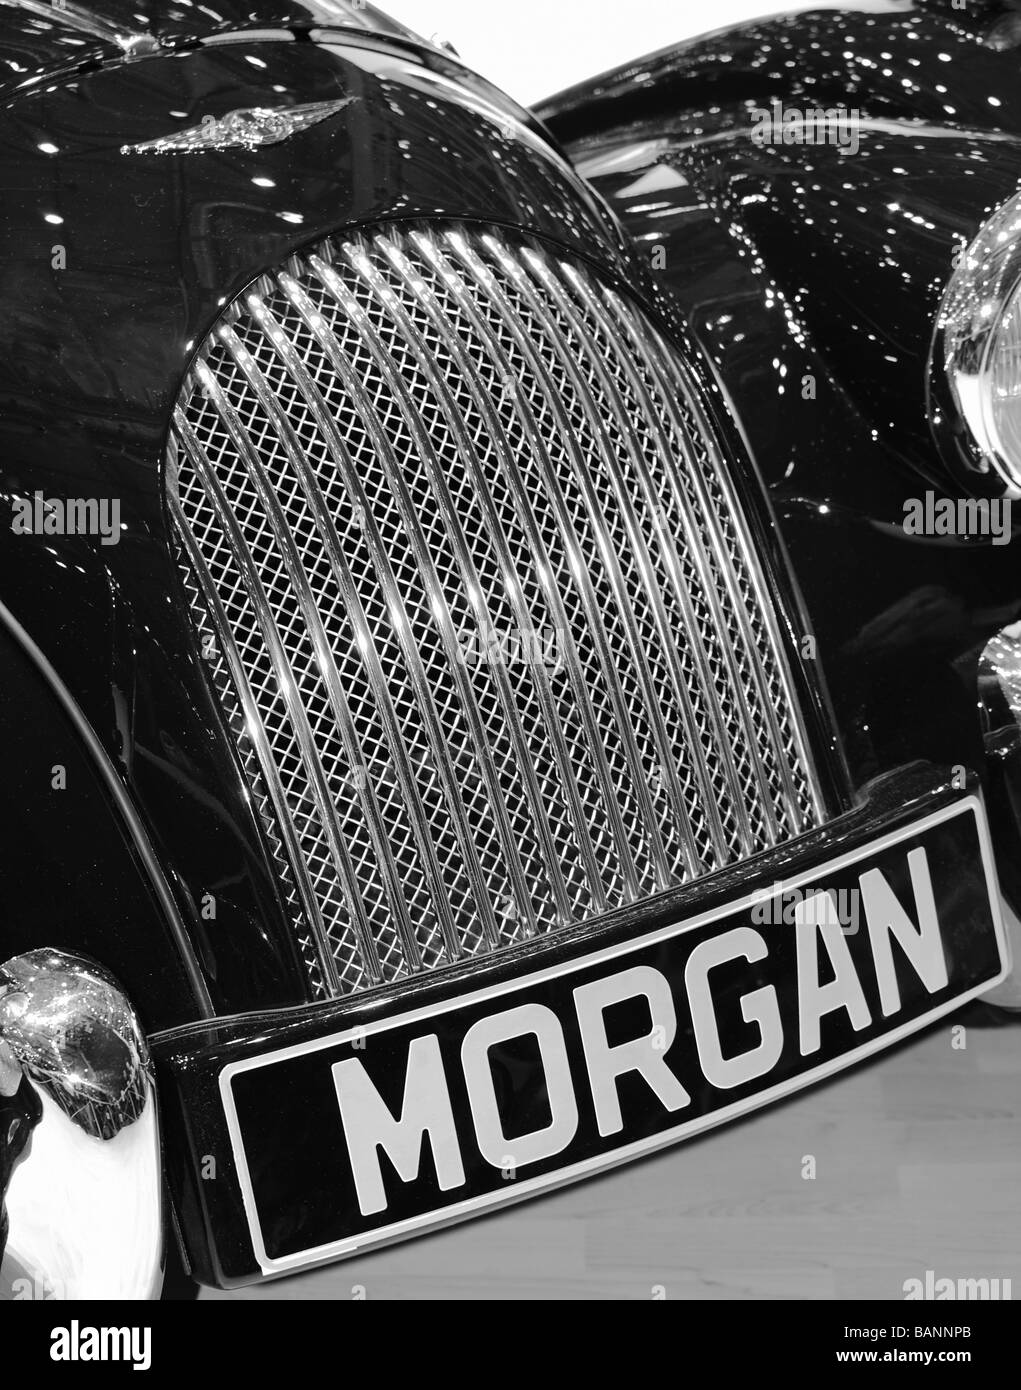 Closeup of the front grille of an old early Morgan car Stock Photo